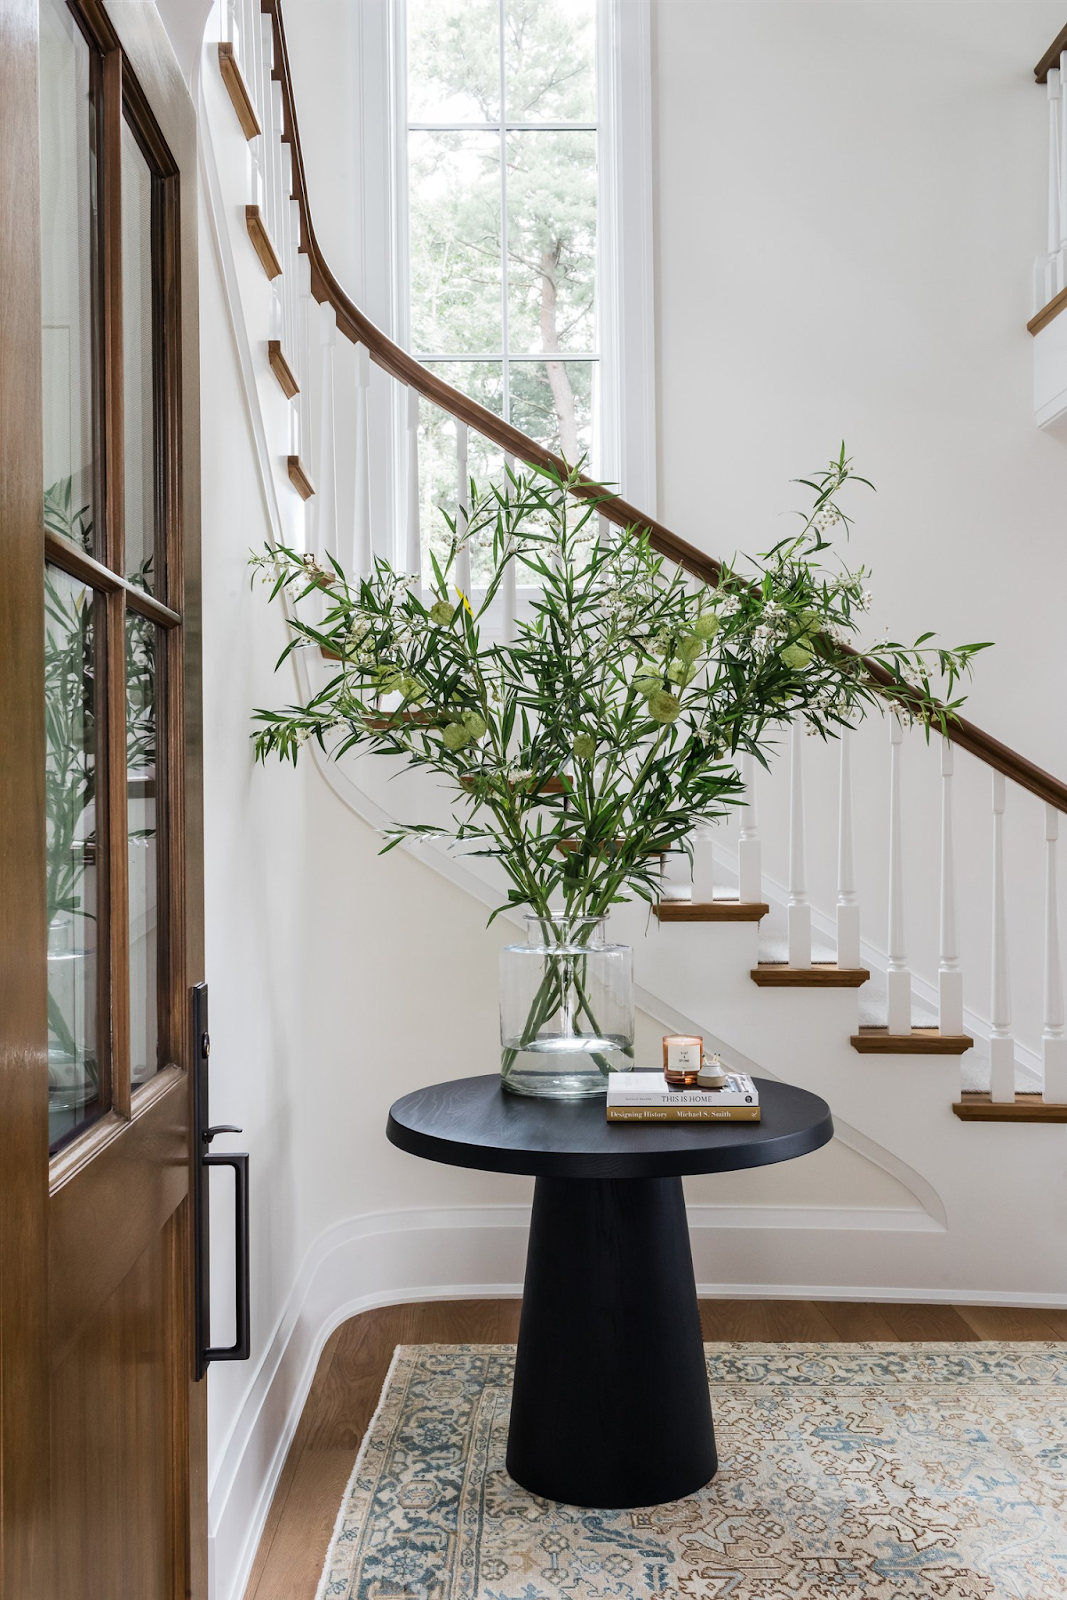 placing plants in an entryway will bring brightness and color